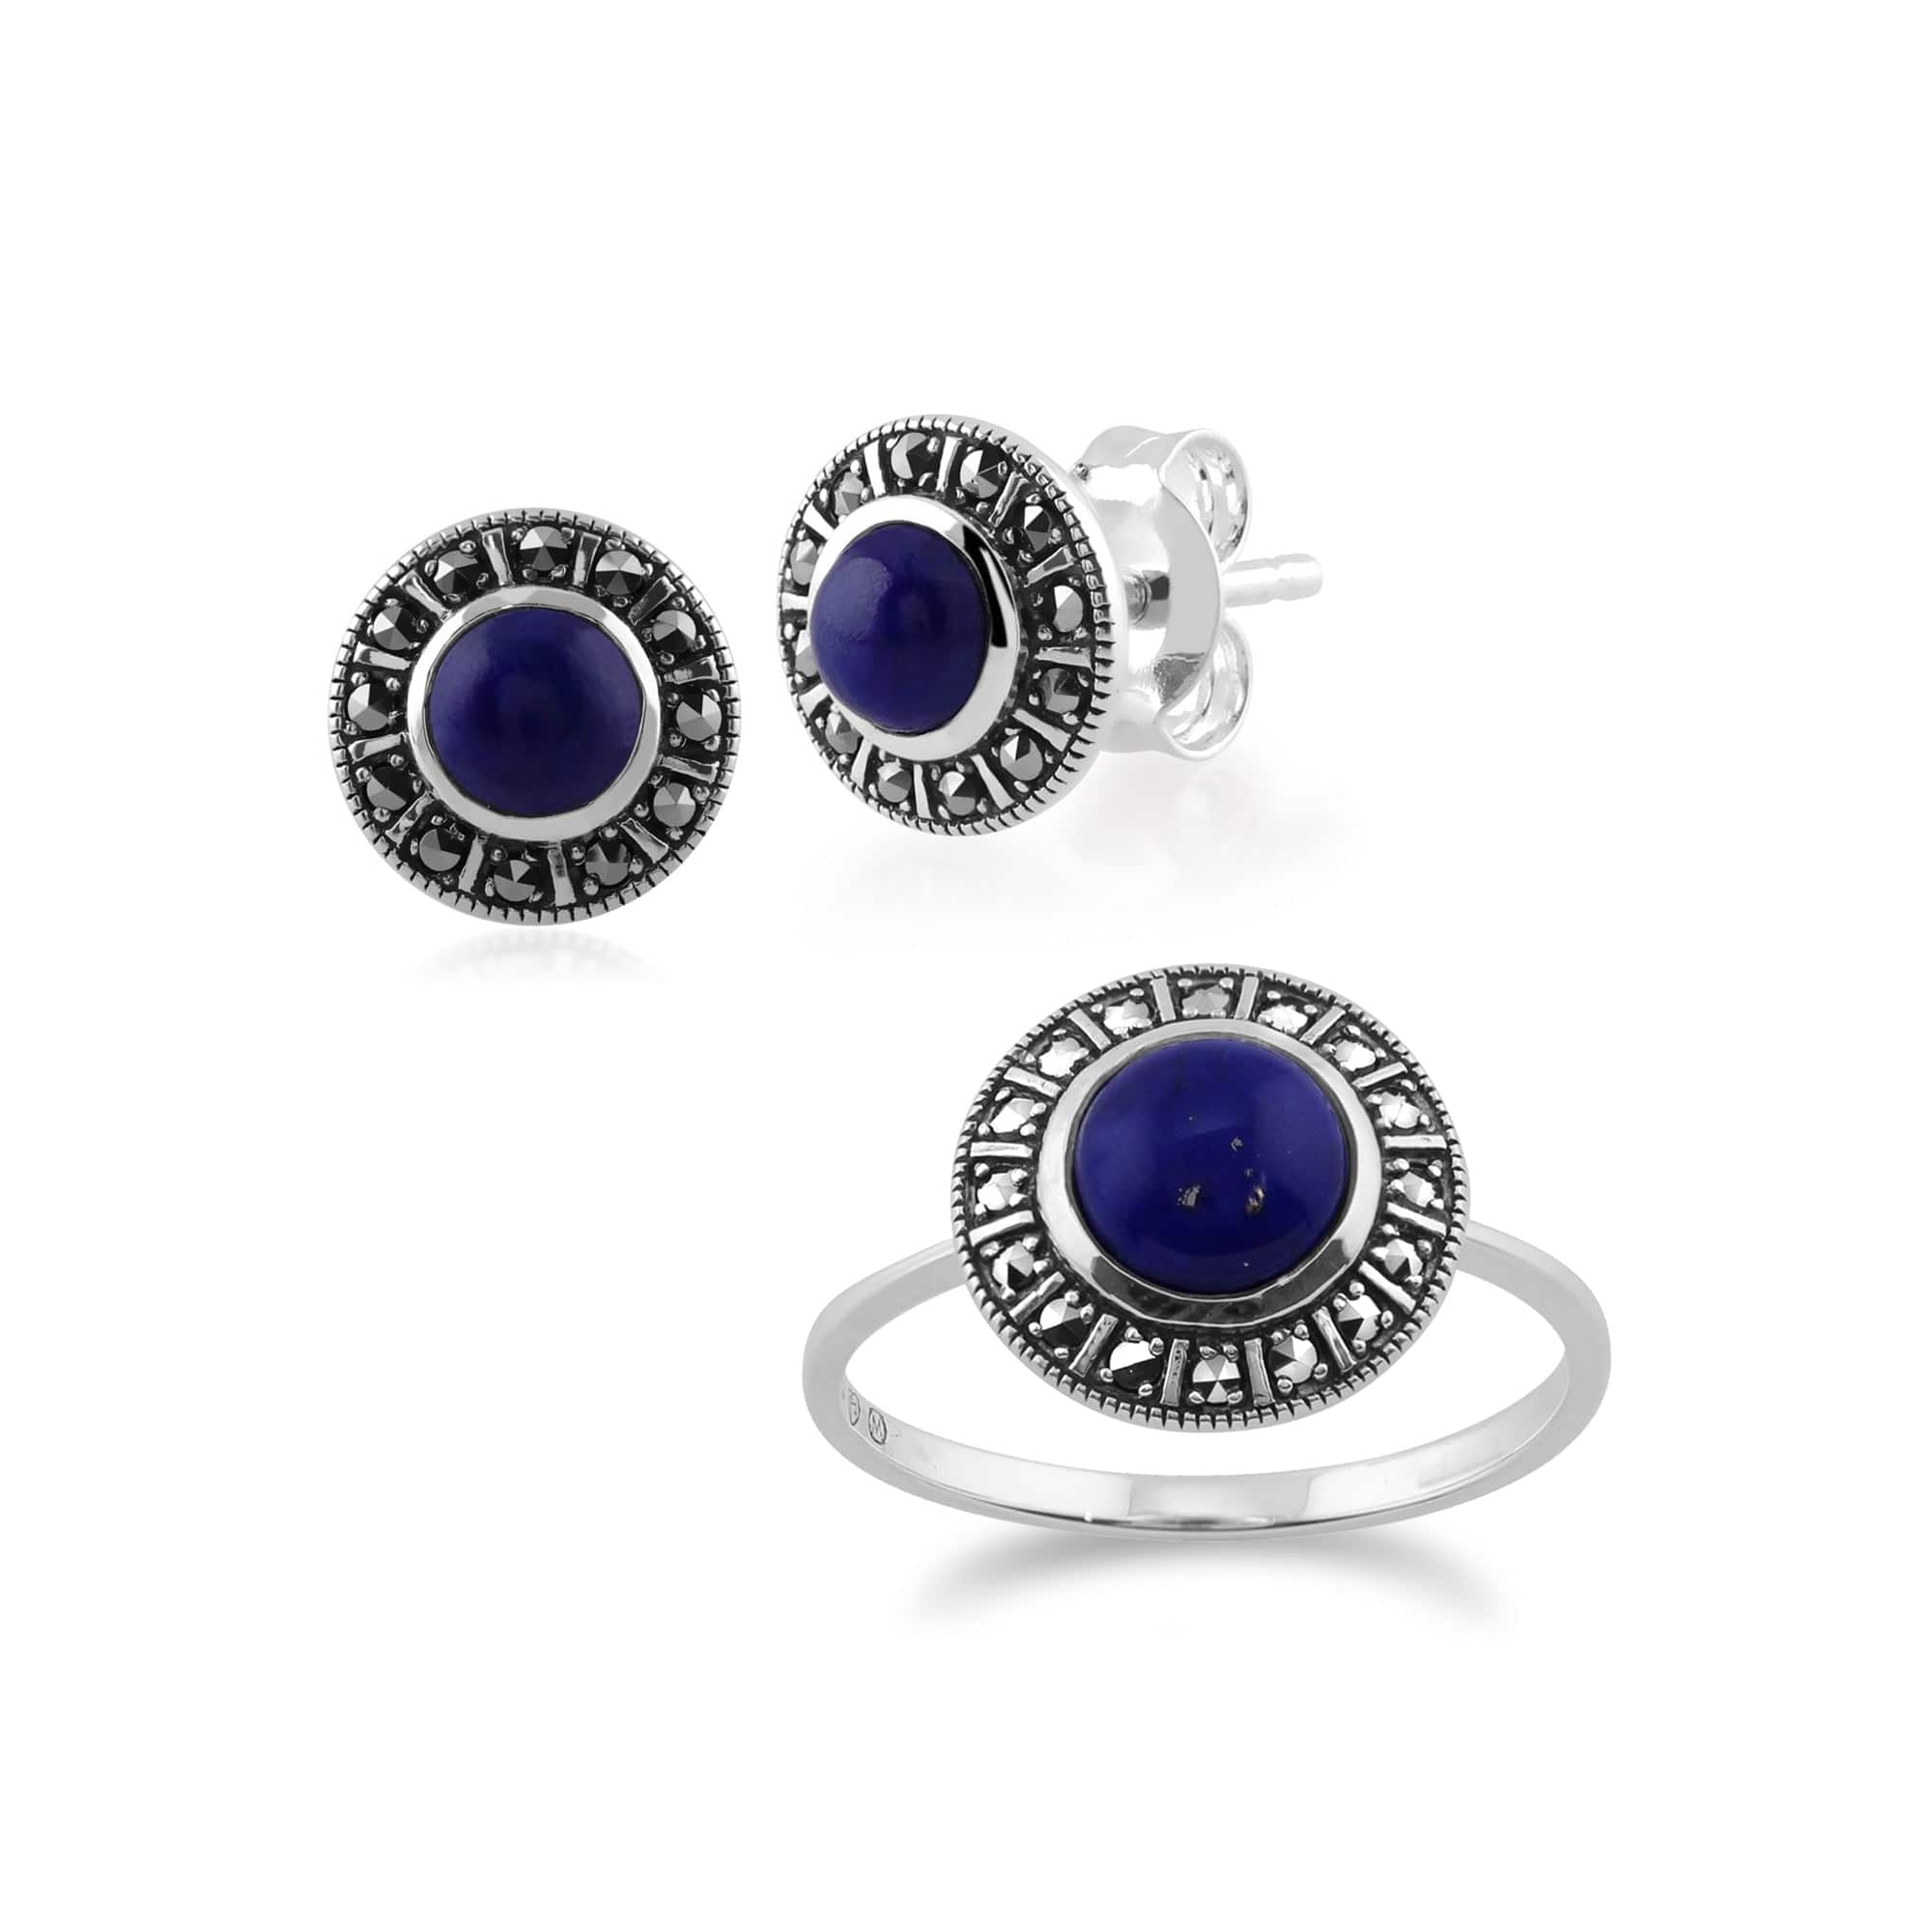 214E850402925-214R513408925 Art Deco Style Round Lapis Lazuli & Marcasite Halo Stud Earrings & Ring Set in 925 Sterling Silver 1